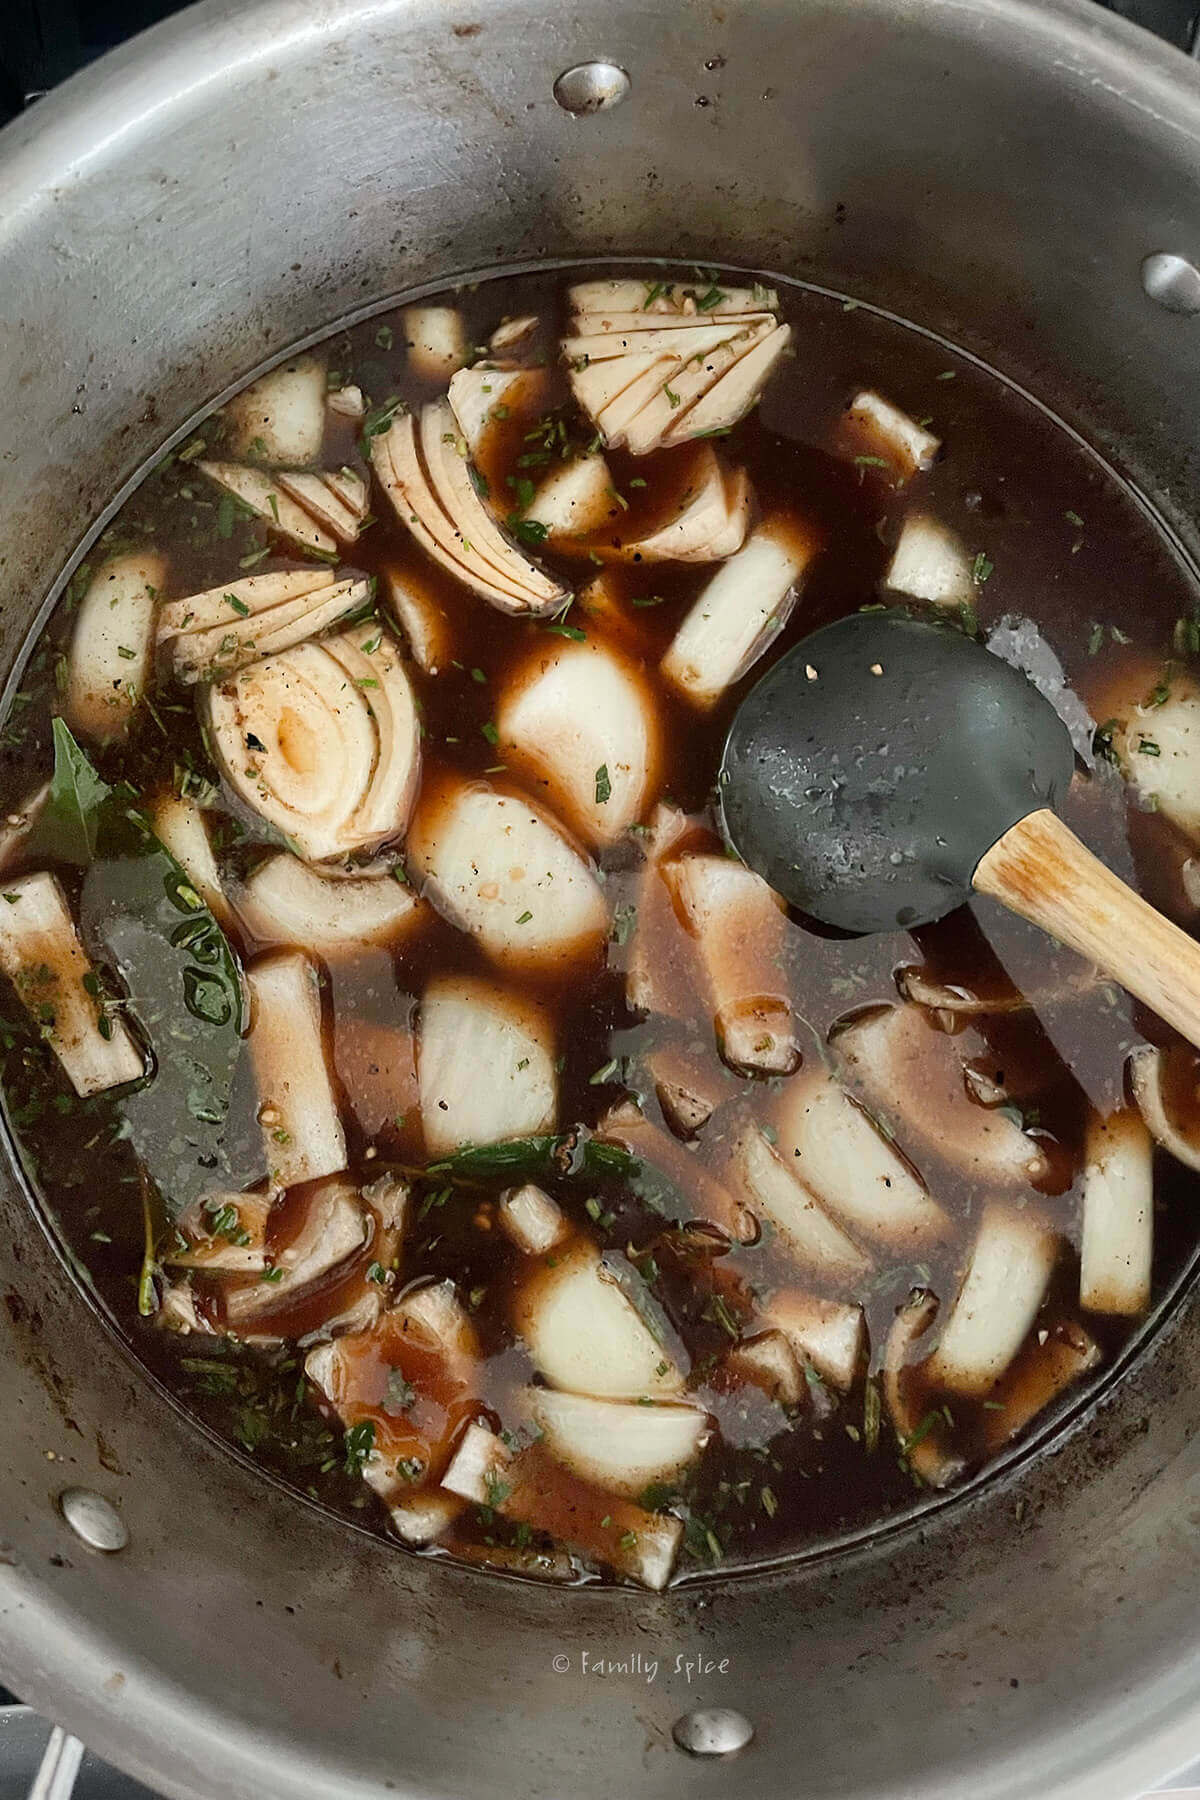 A stainless pot with onion slices and herbs in a beef broth